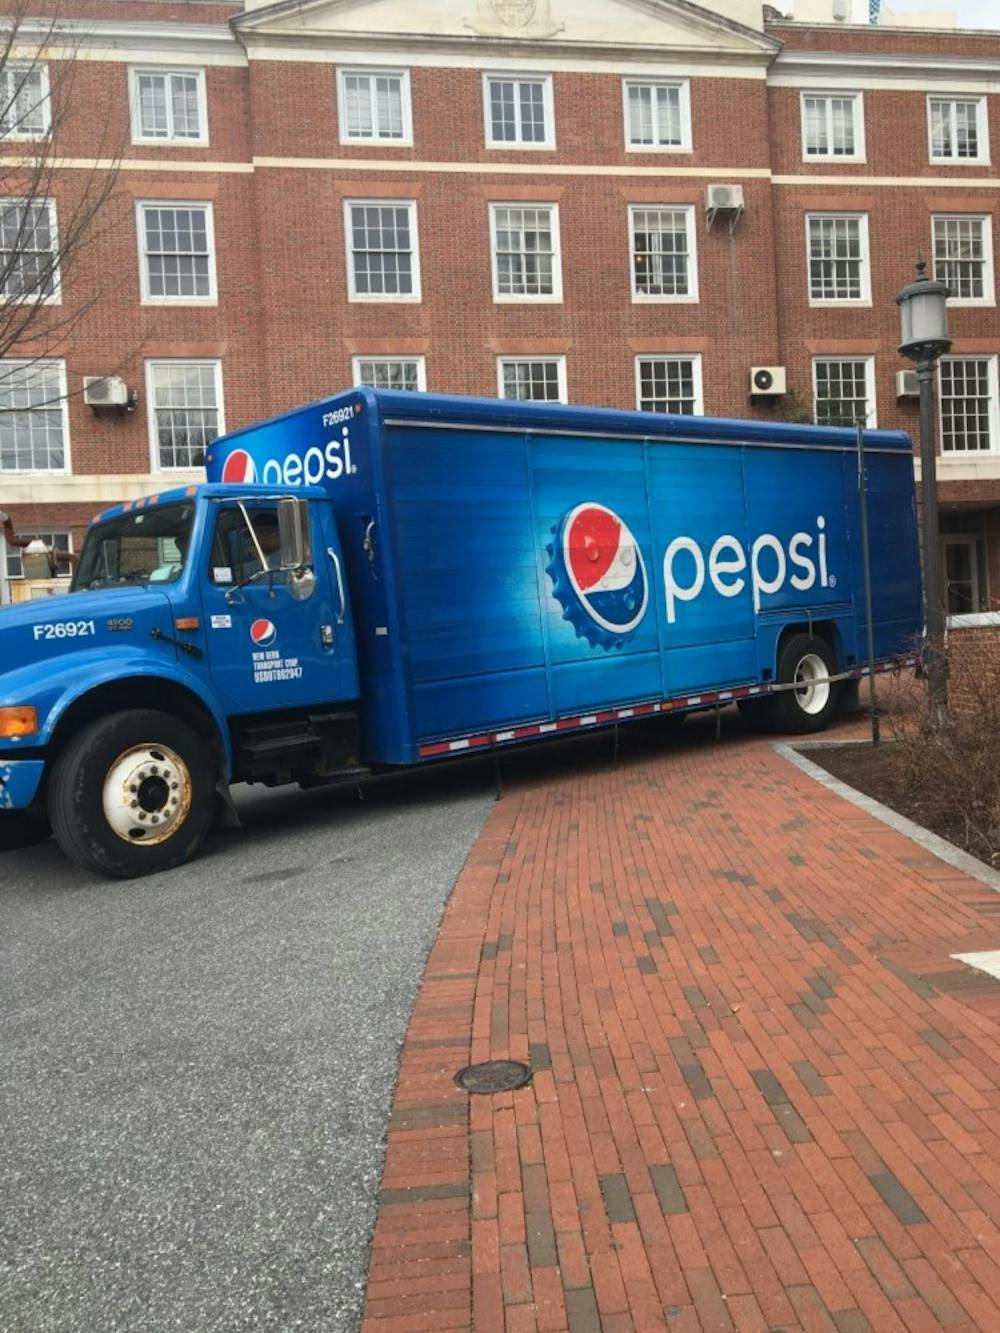 COURTESY OF KATY WILNER
Santoro and Real Food Hopkins support the Pour Out Pepsi campaign, which urges the University to end its exclusivity contract with Pepsi.&nbsp;